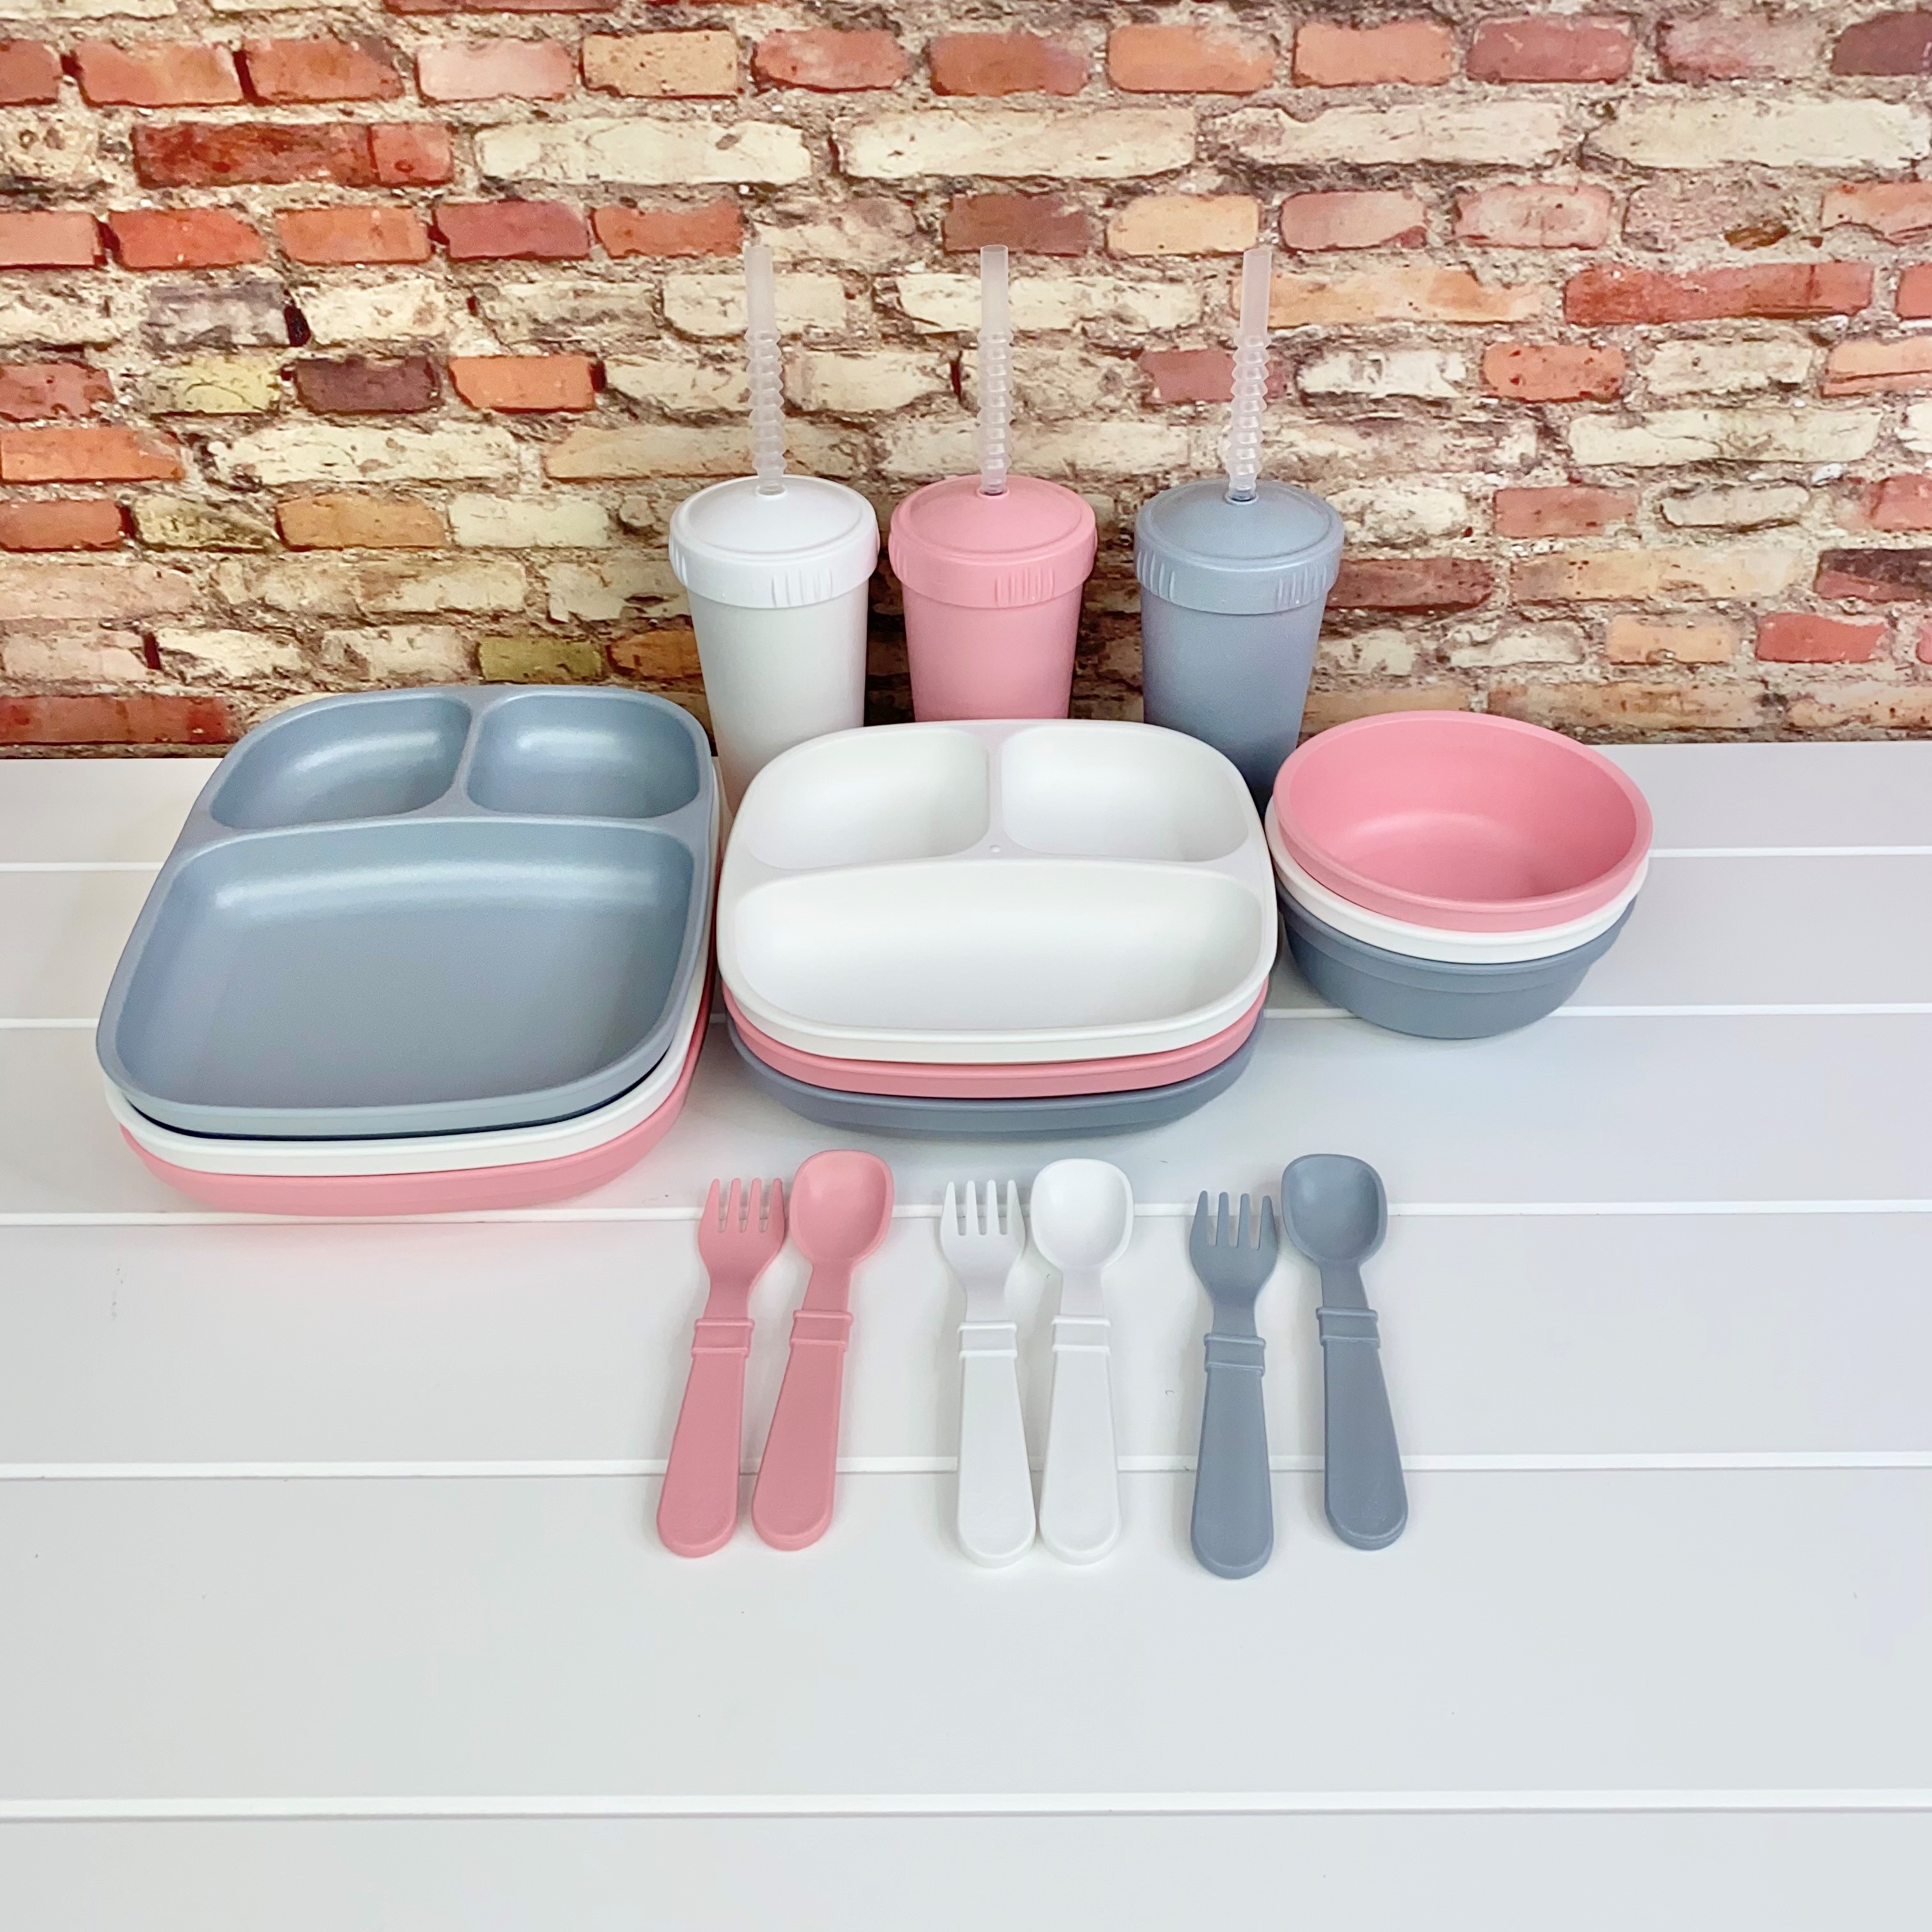 Replay Kids Divided Plate Sets - Choose Your Colours!